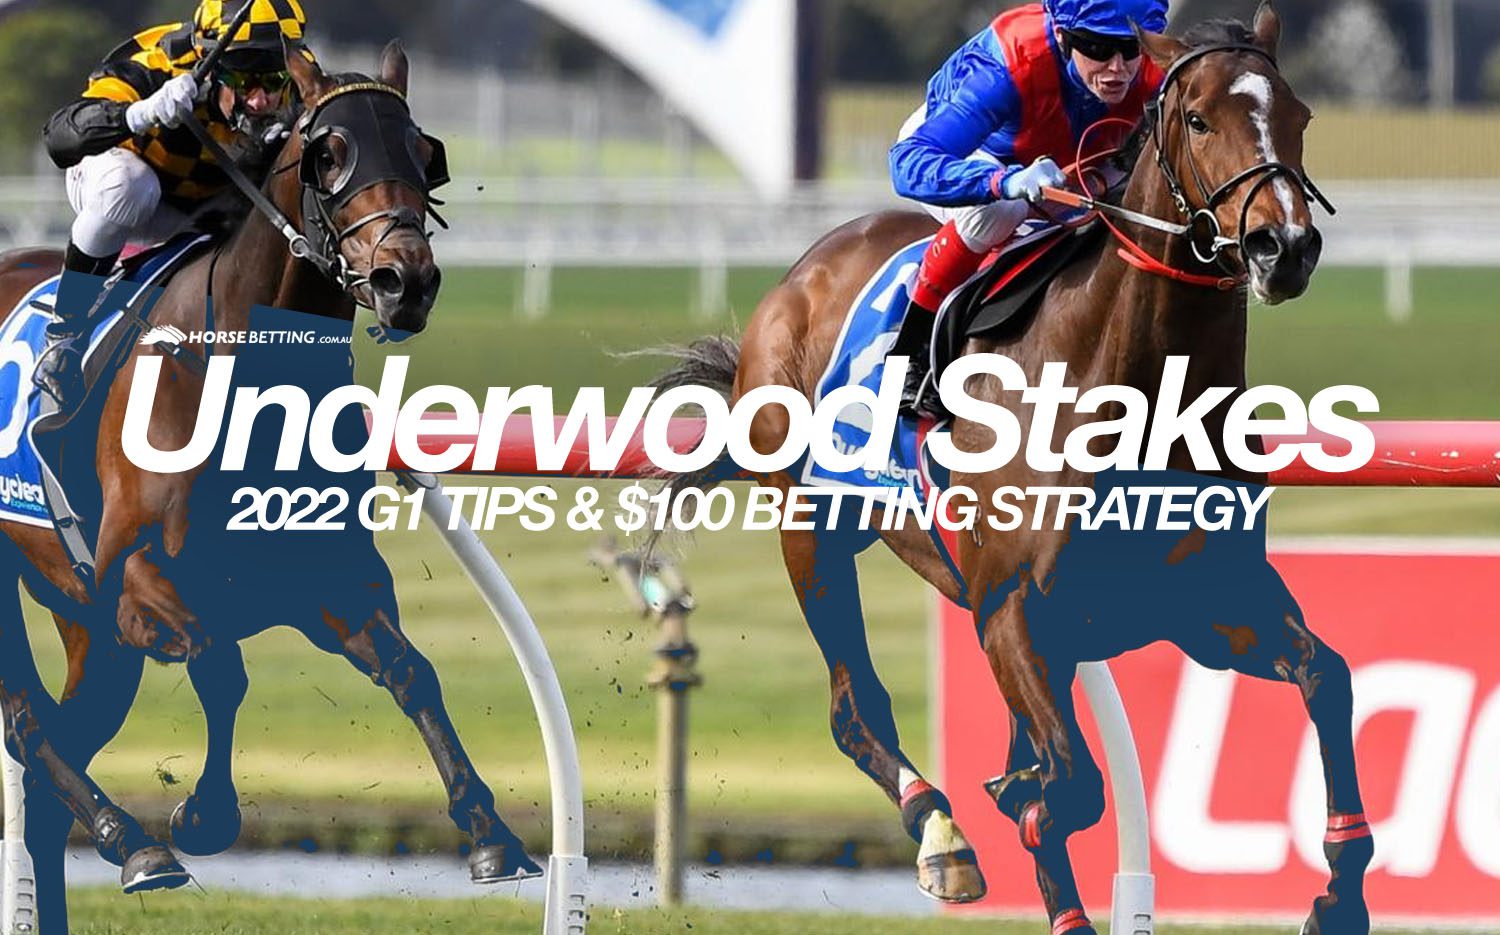 Underwood Stakes preview